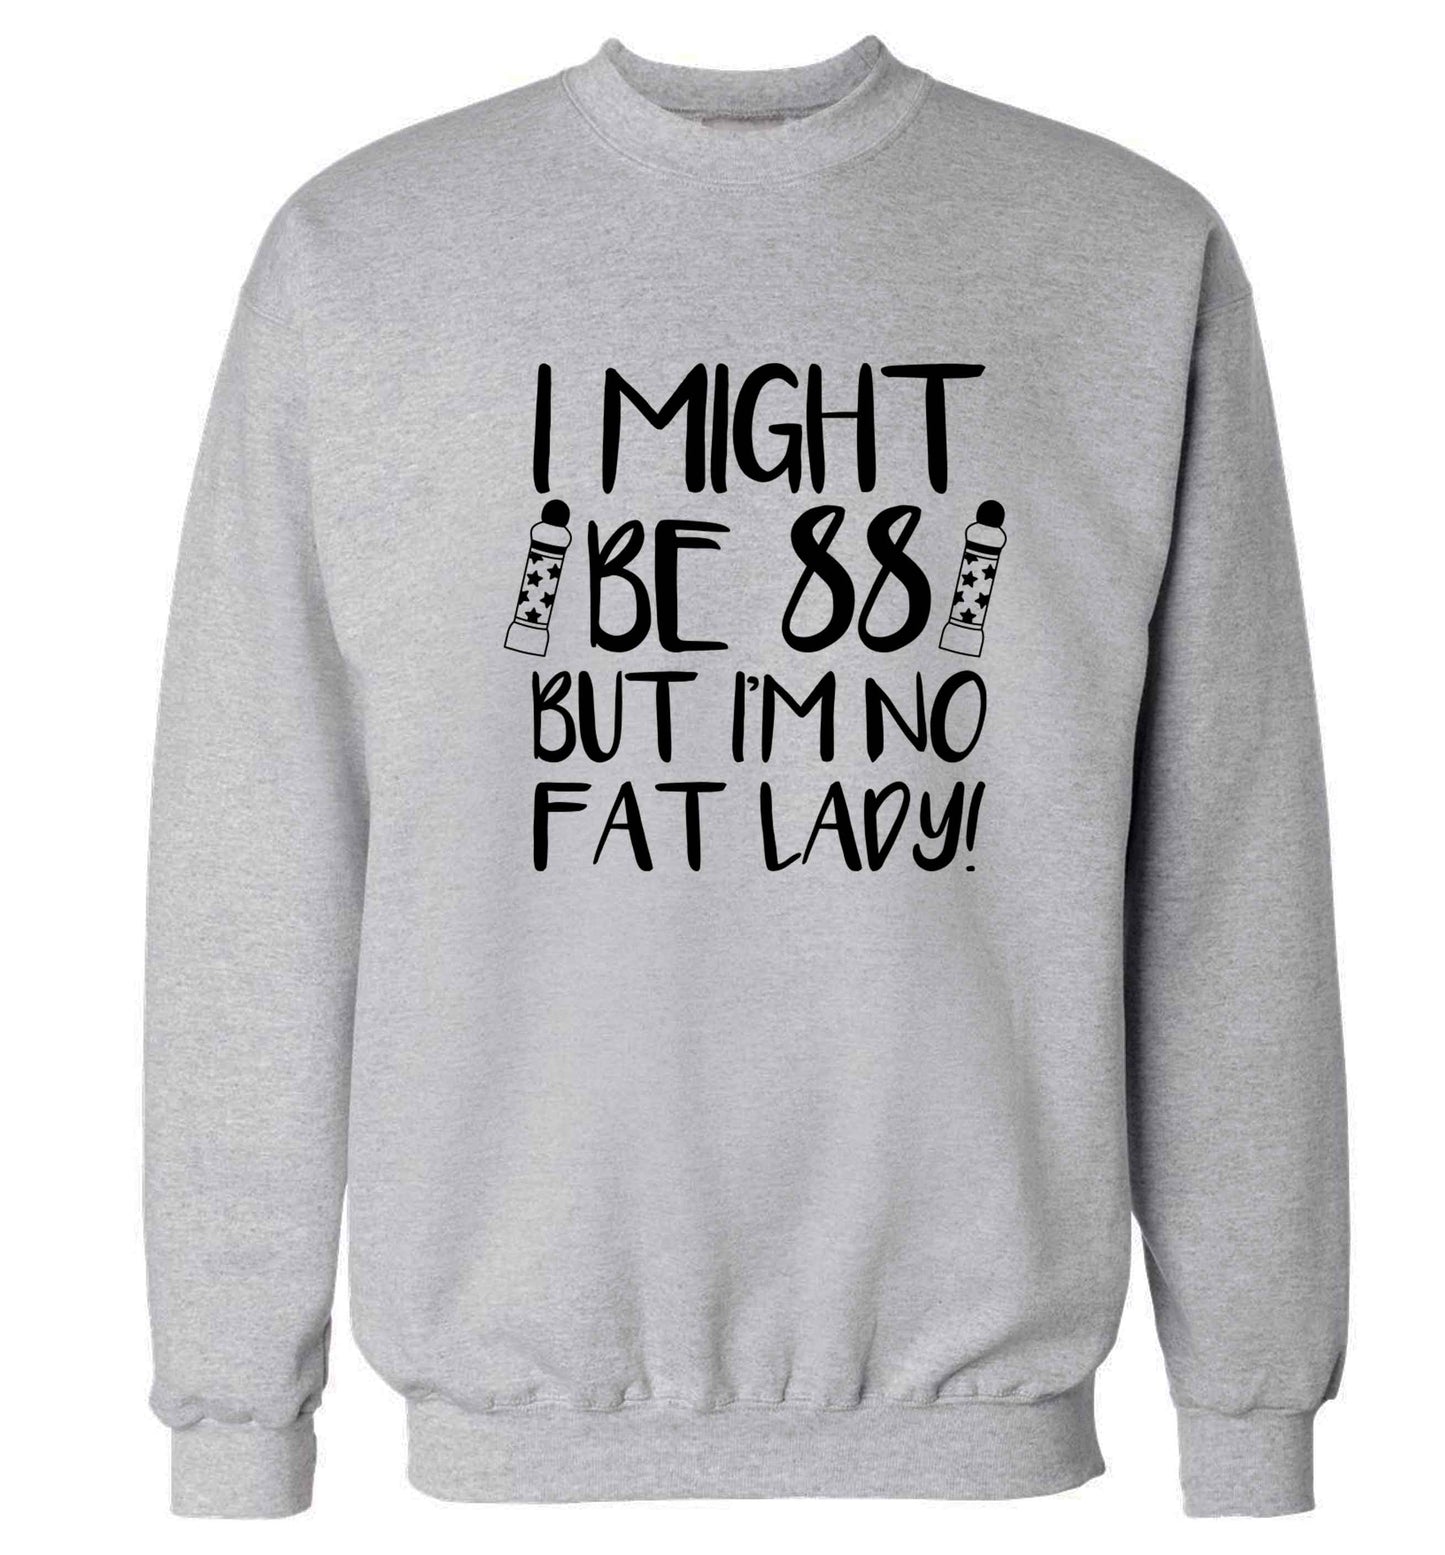 I might be 88 but I'm no fat lady Adult's unisex grey Sweater 2XL